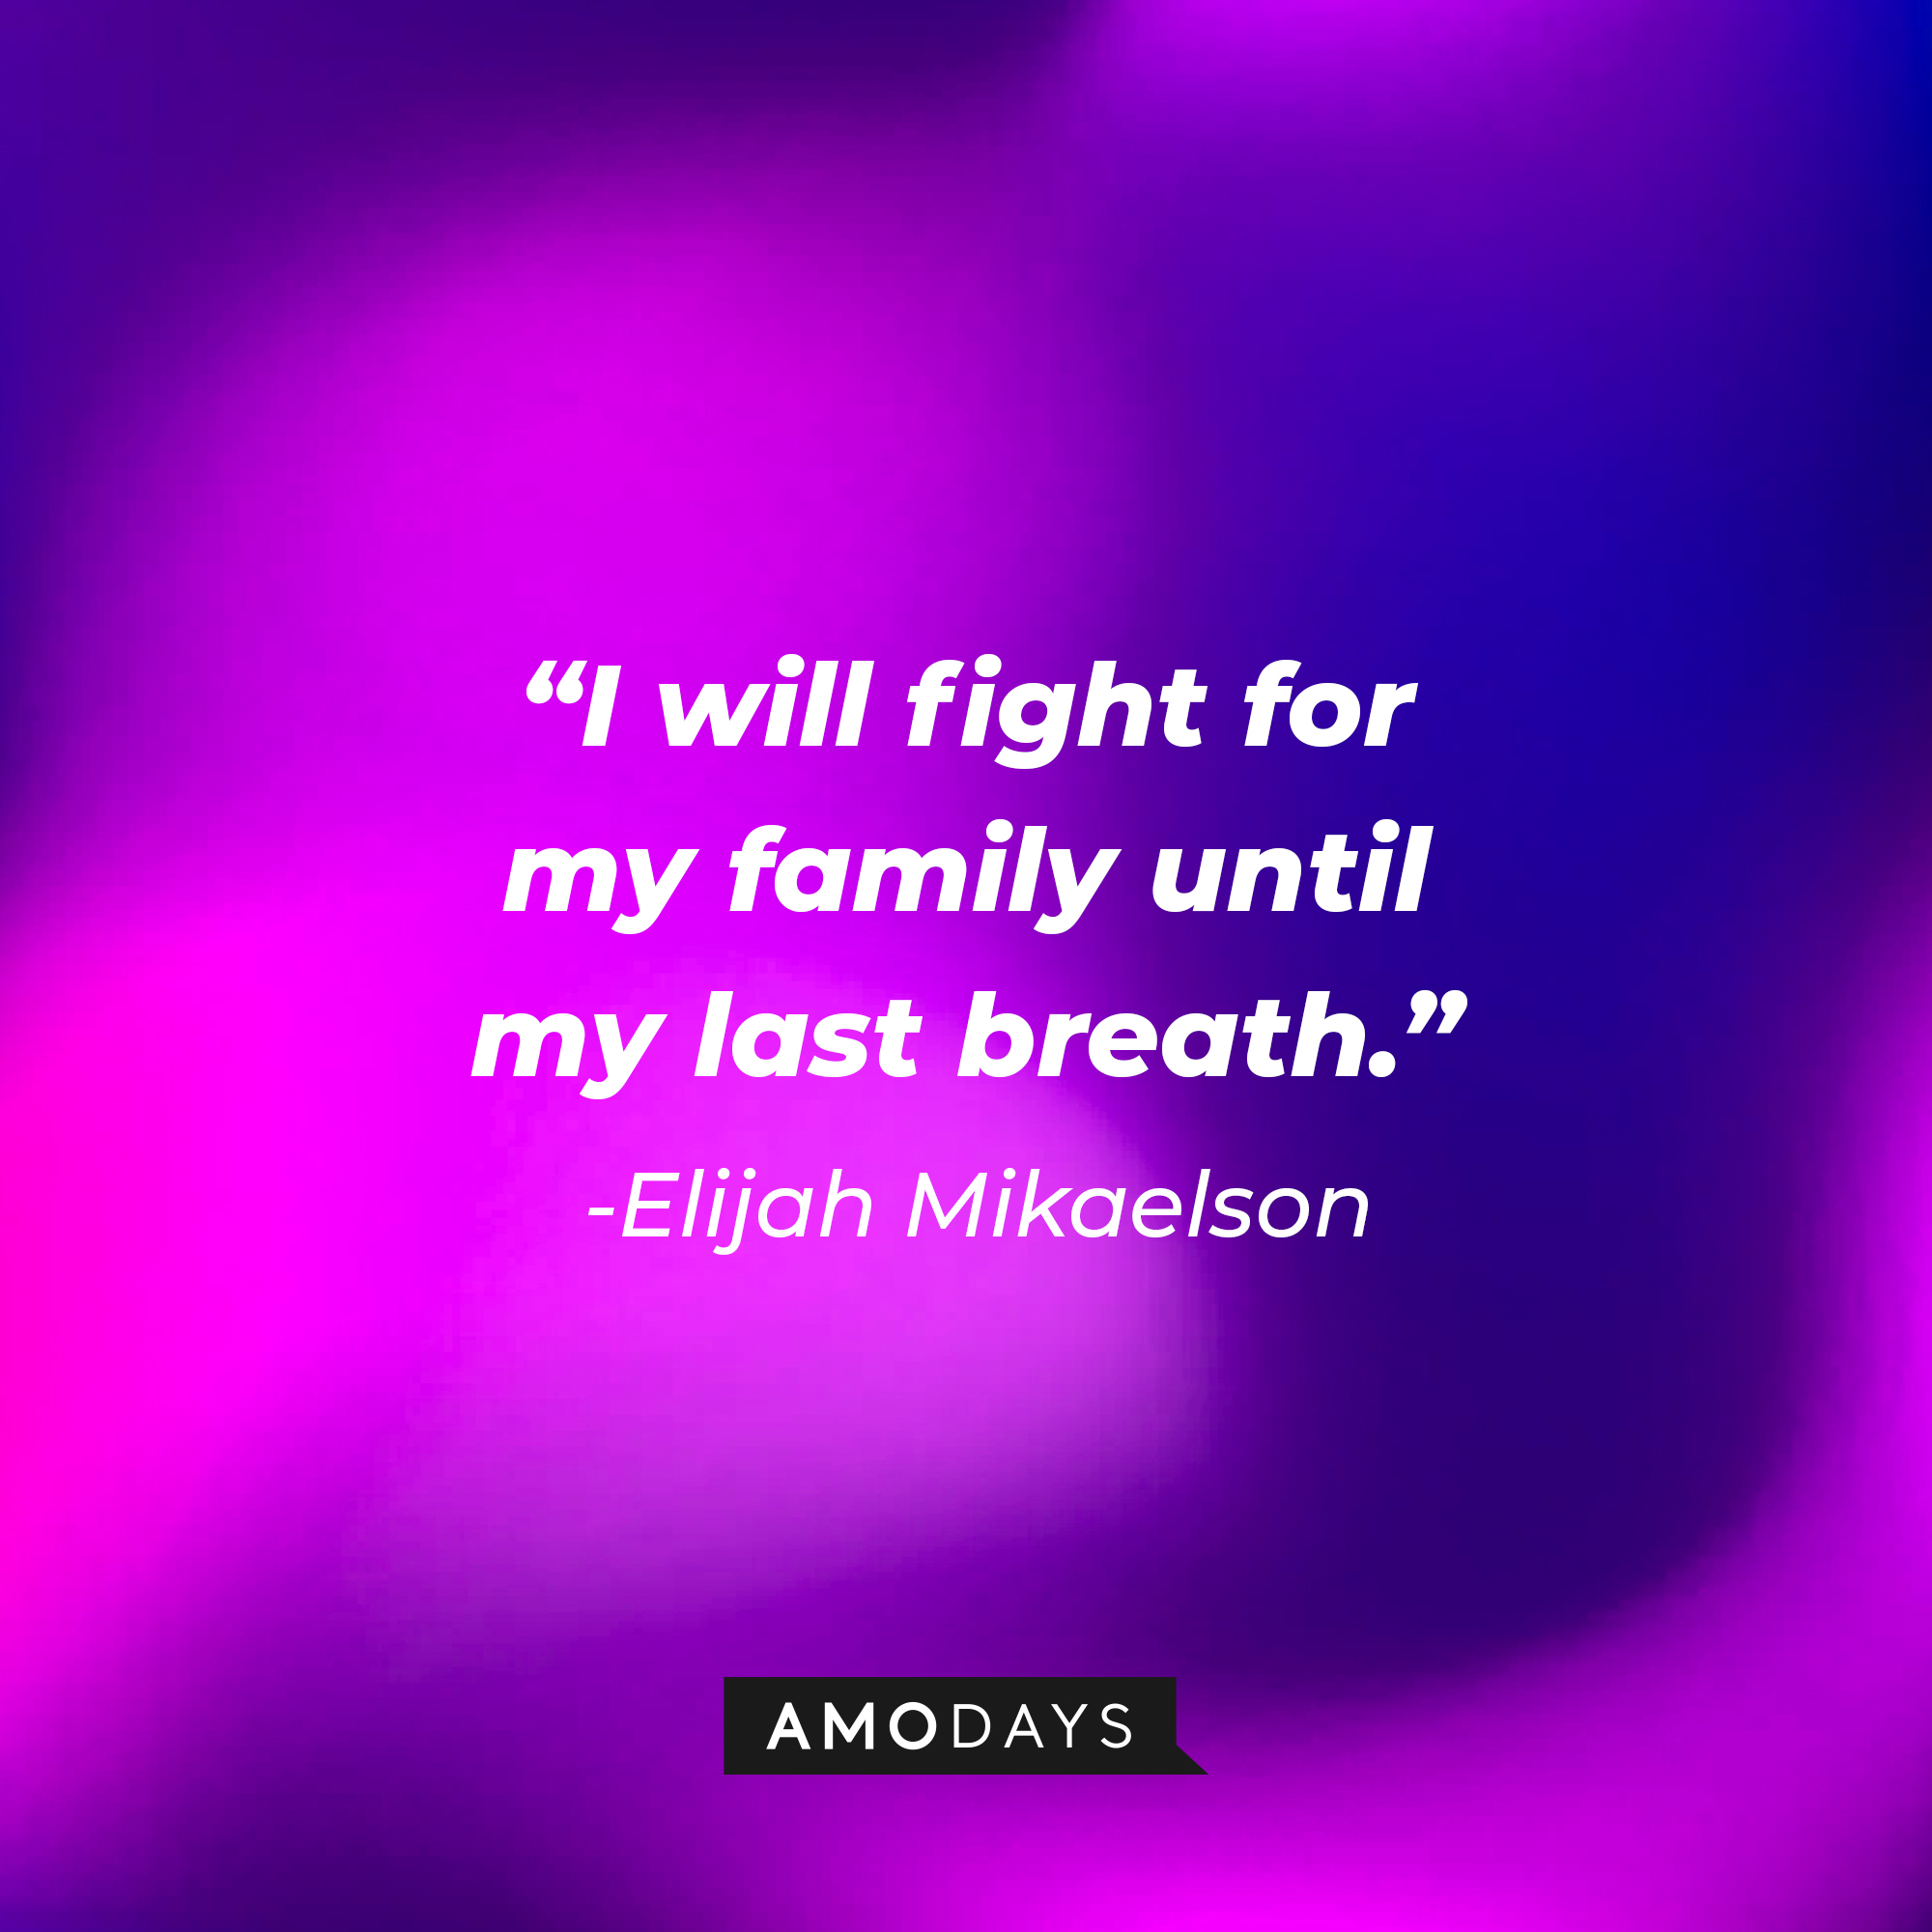 Elijah Mikaelson's quote: "I will fight for my family until my last breath." | Source: facebook.com/thevampirediaries